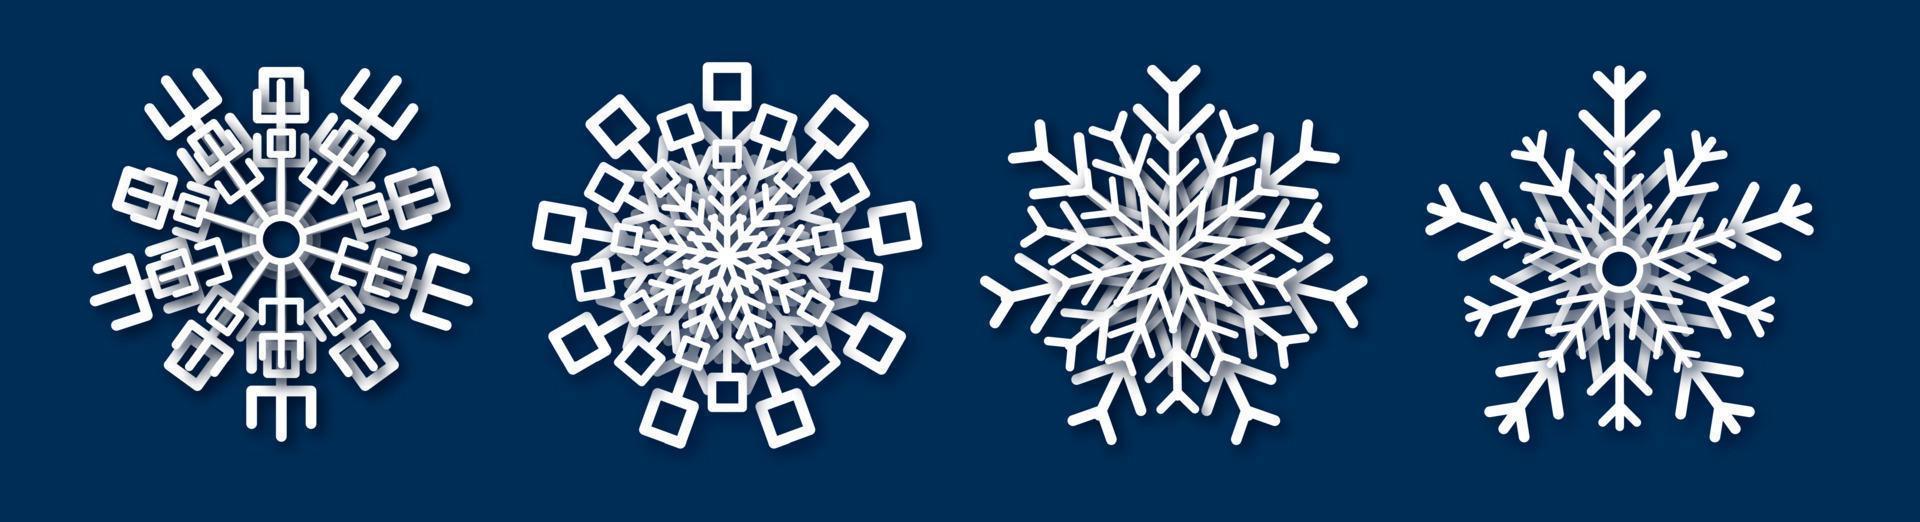 Paper cut snowflake. Set of four white snowflakes on blue background. Christmas and New Year decoration elements. Vector illustration